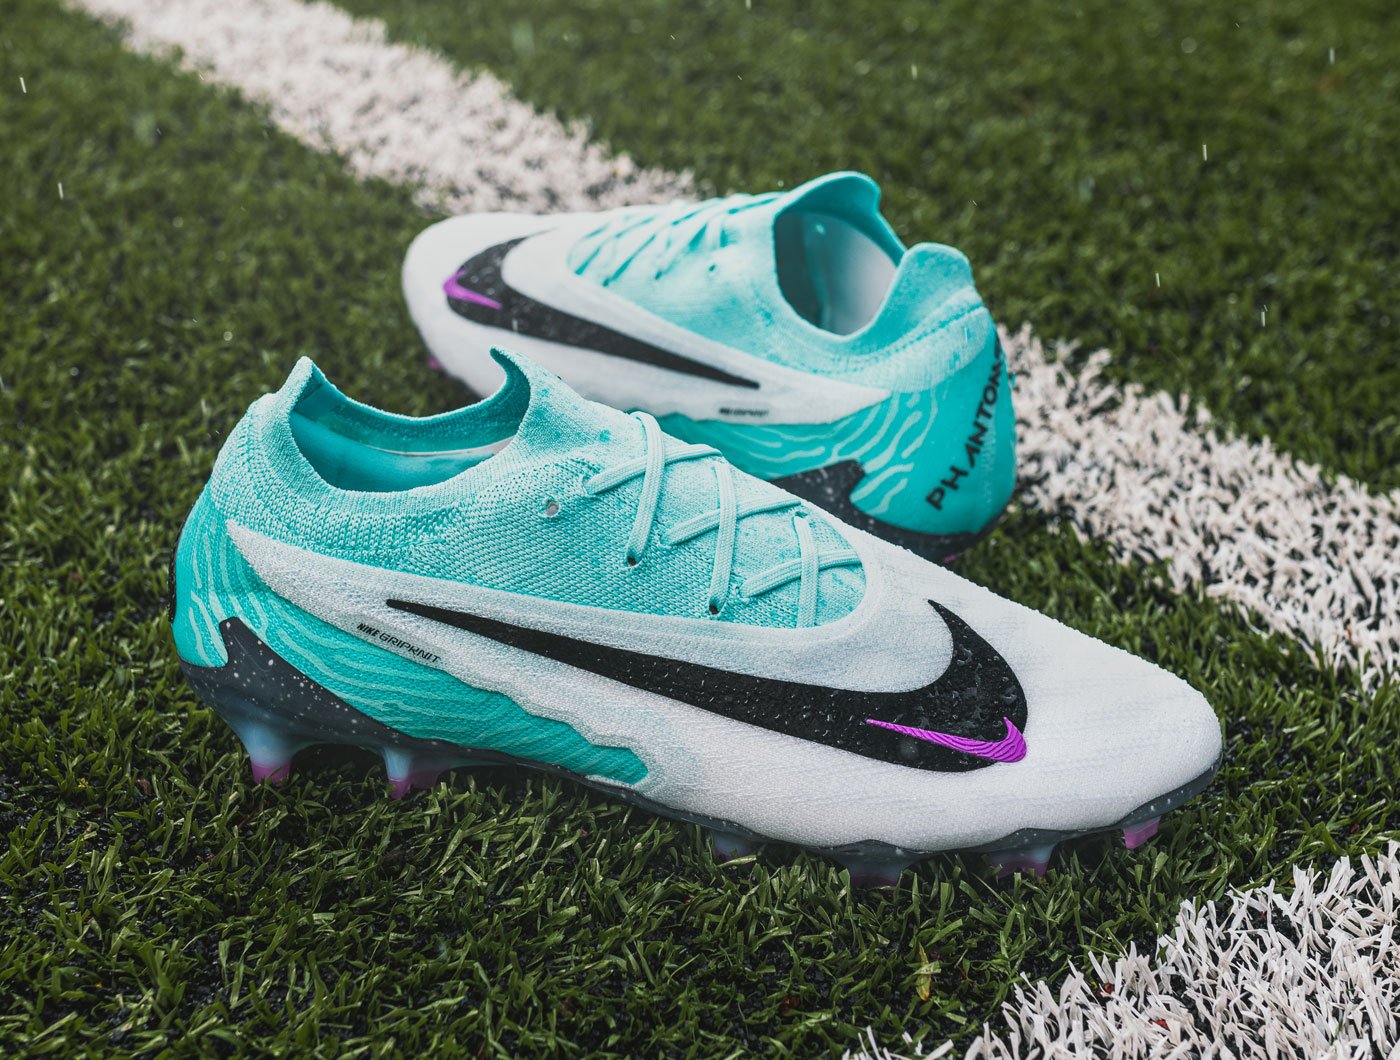 newest nike soccer boots